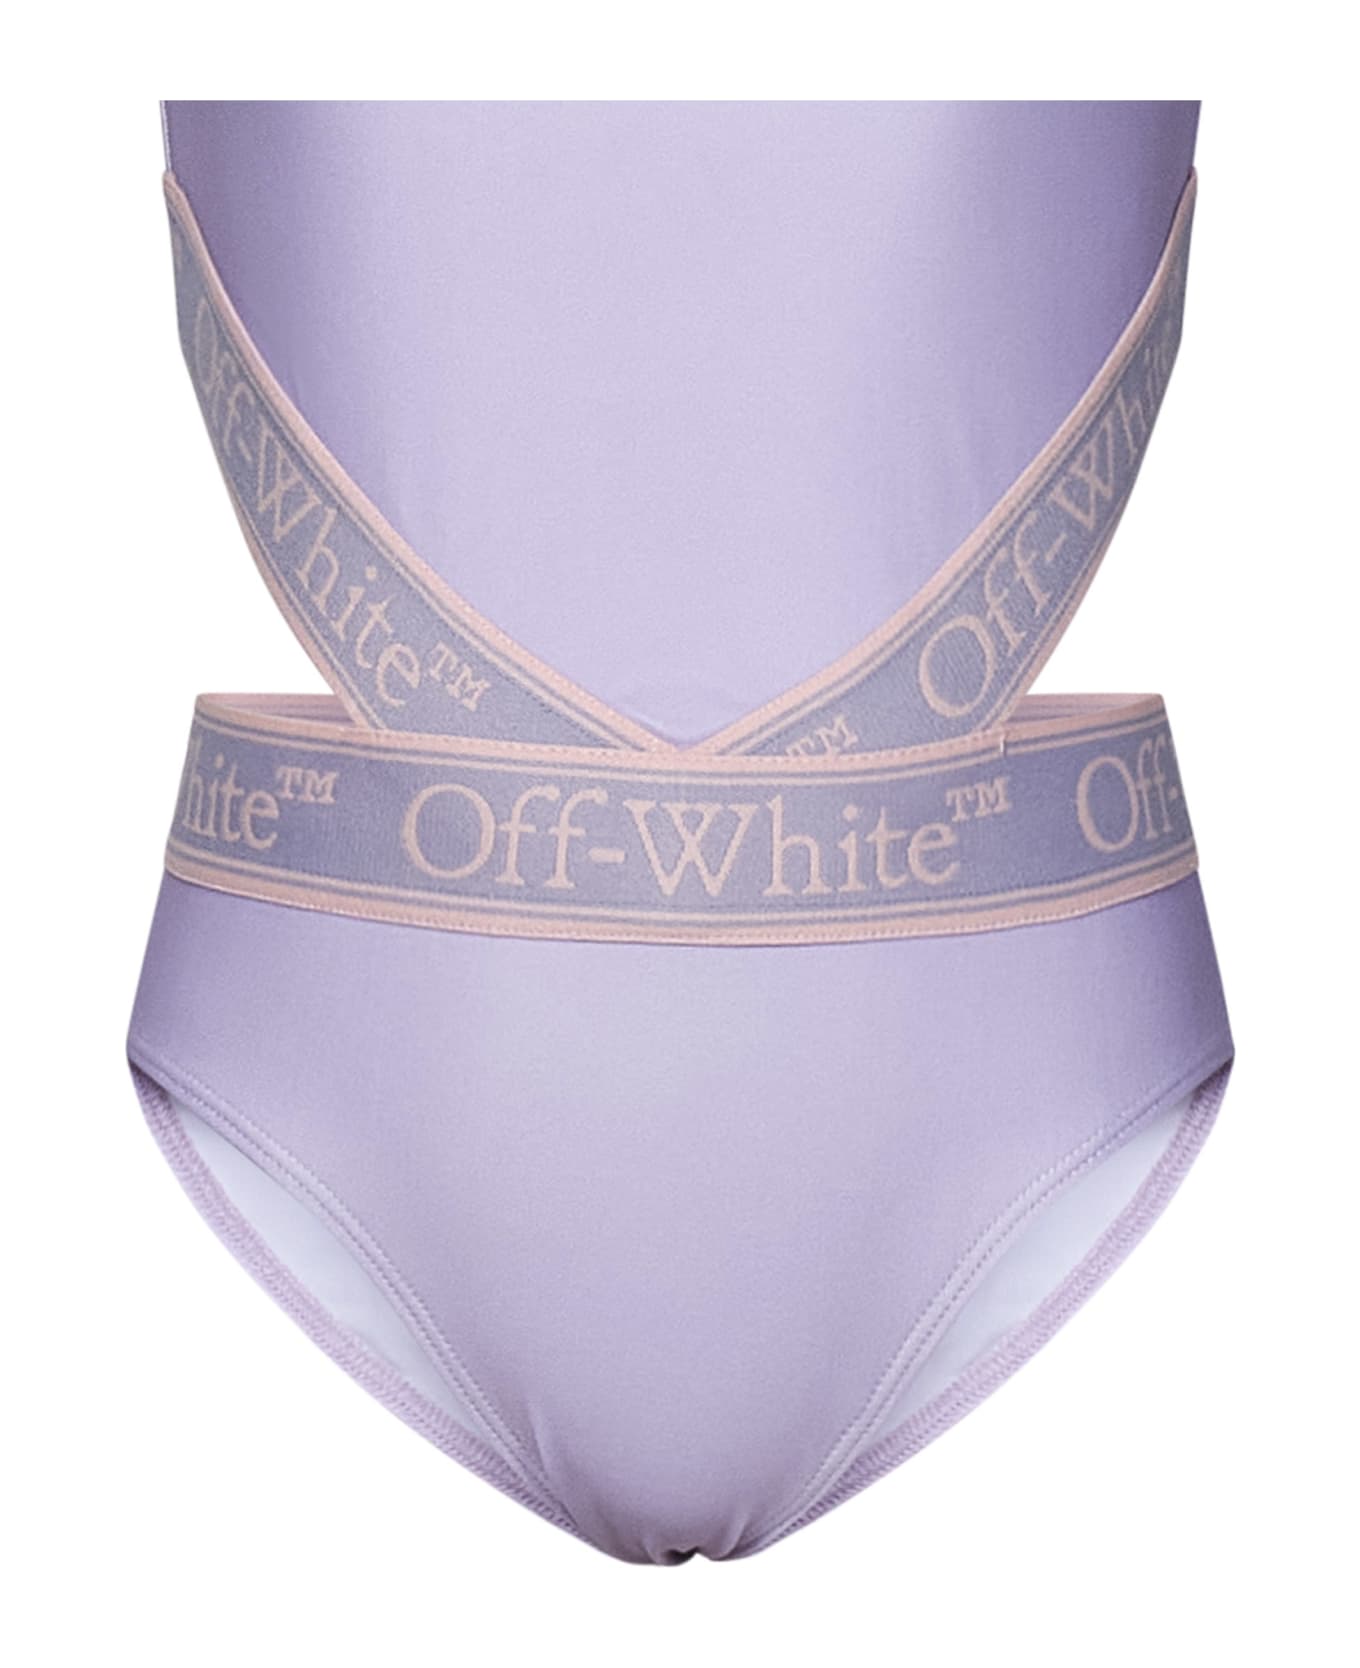 Off-White Kids Swimsuit - Lilac 水着